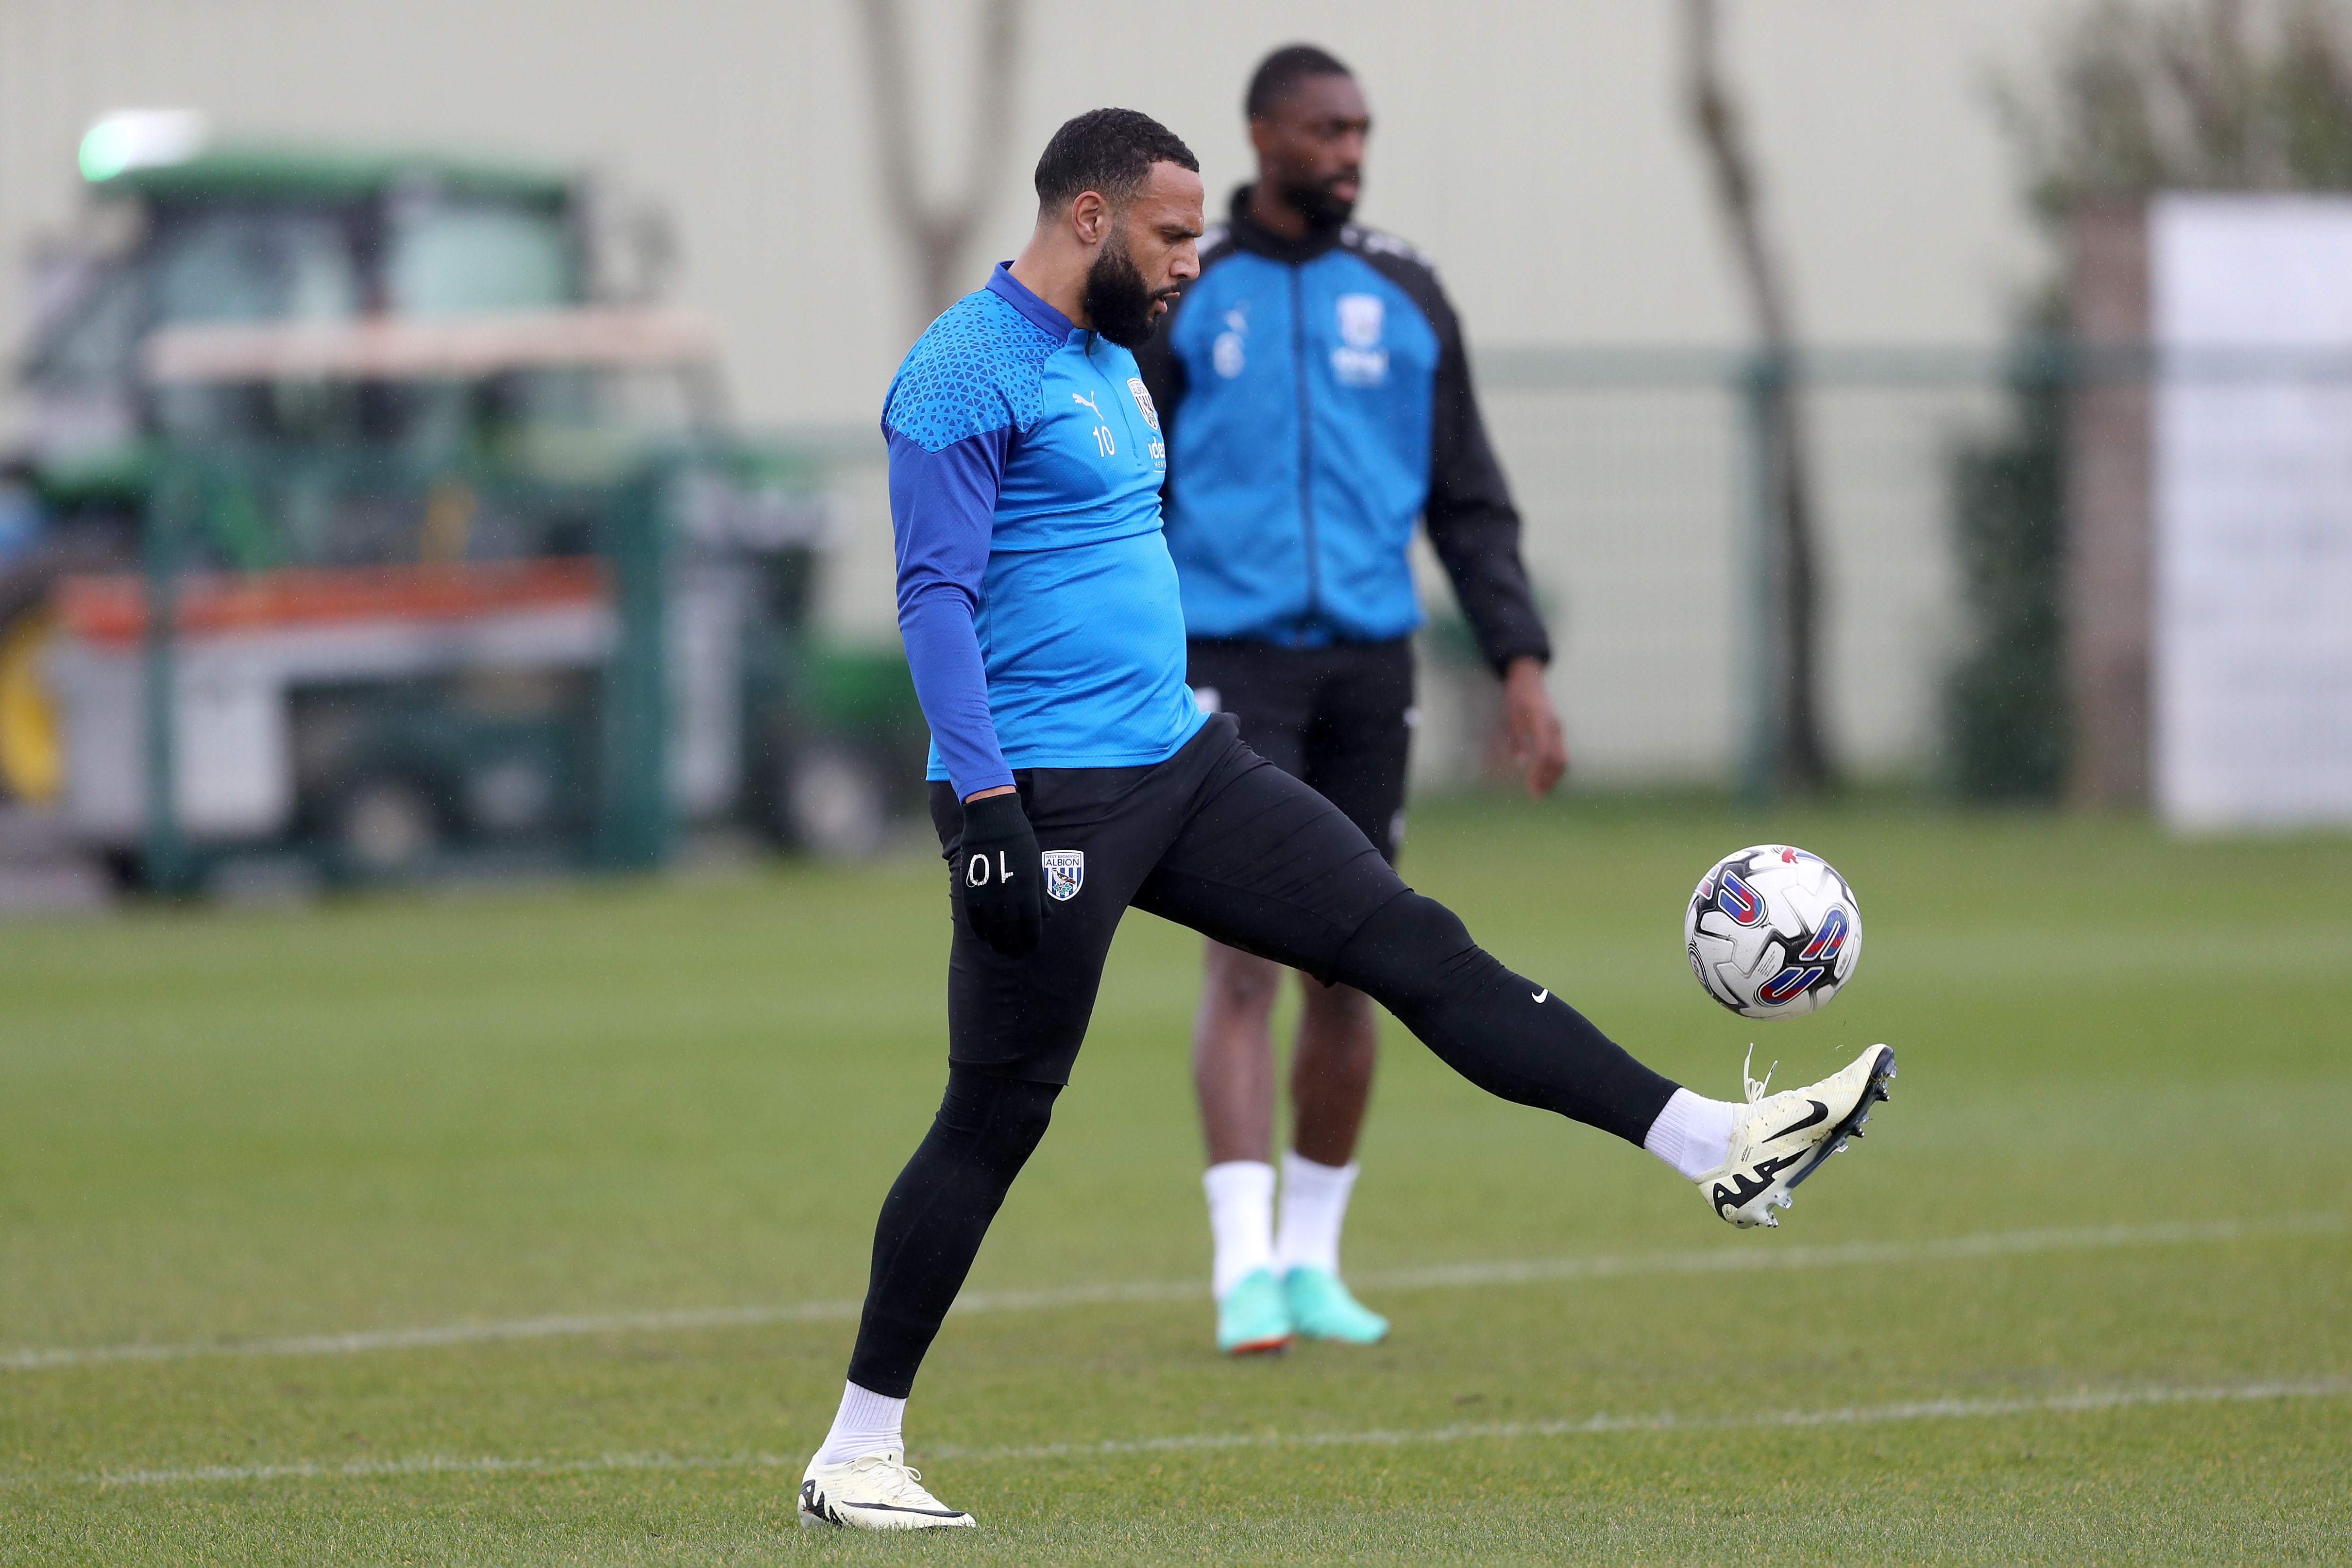 Matty Phillips juggling a football during a training session